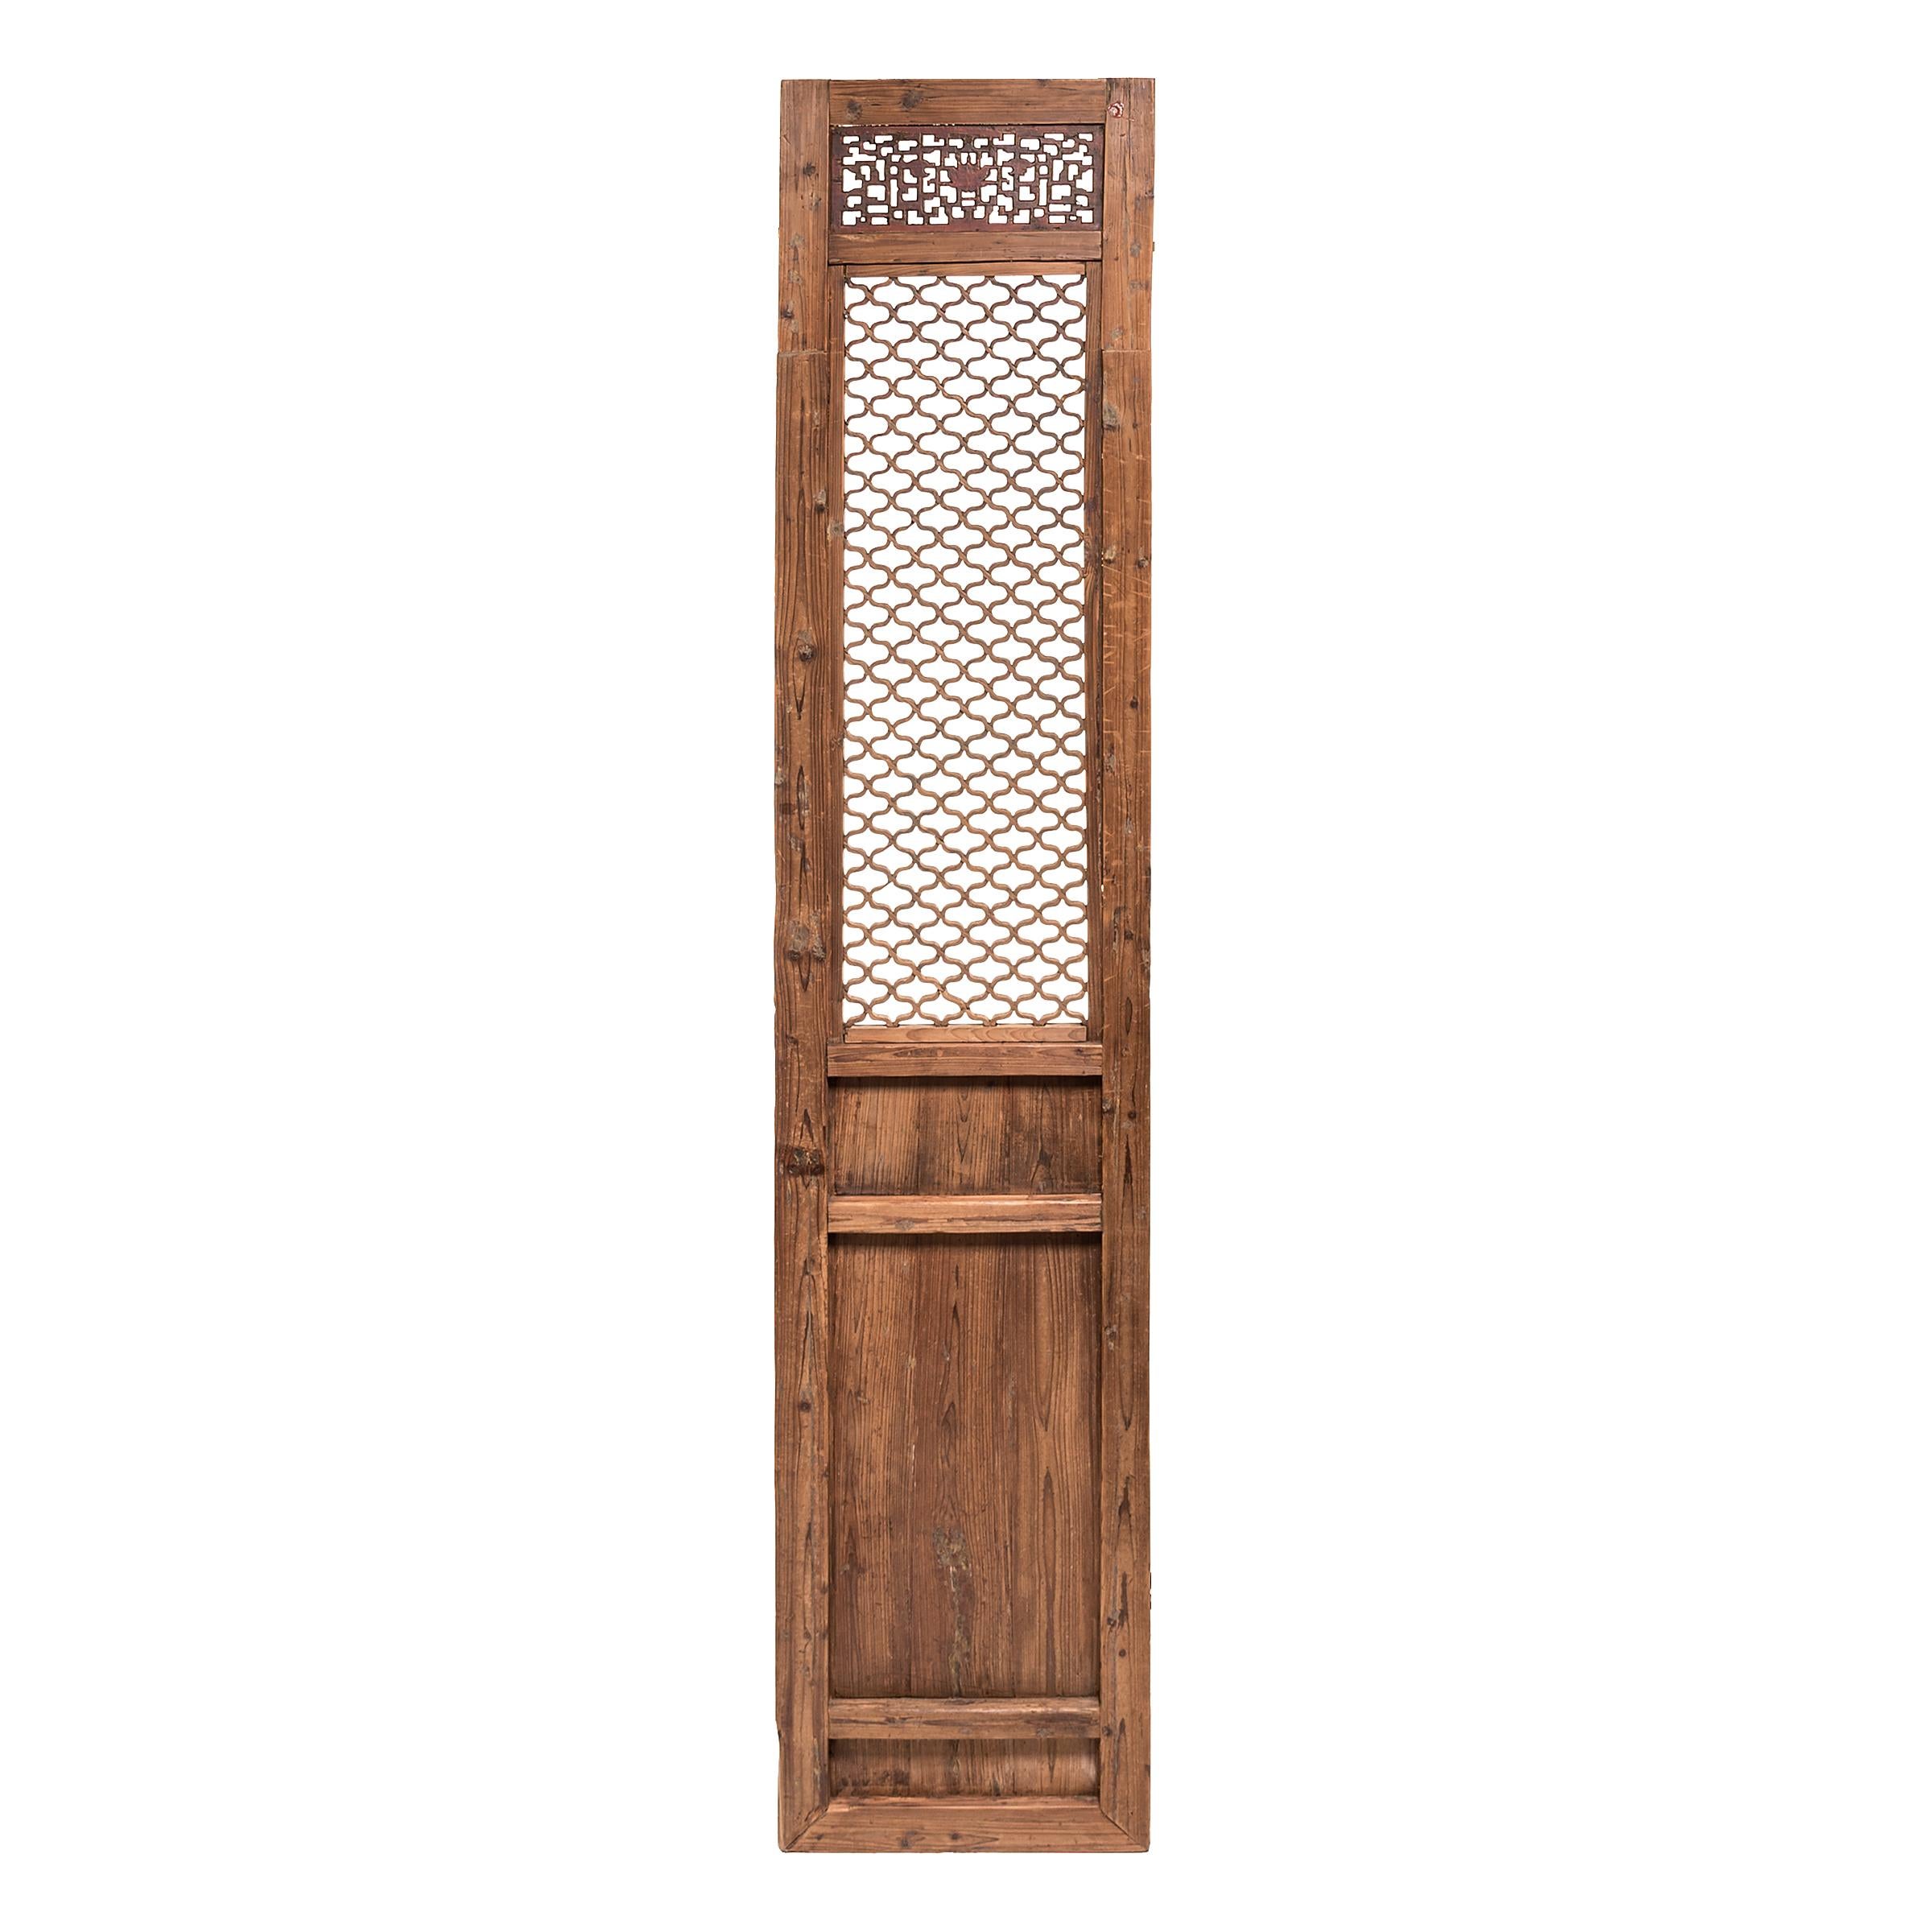 This elegant, 19th-century door panel evokes life in a traditional courtyard home, where the openwork lattice design allowed light and air to flow into the inner rooms while maintaining privacy for its occupants. Creating lattice was a geometric